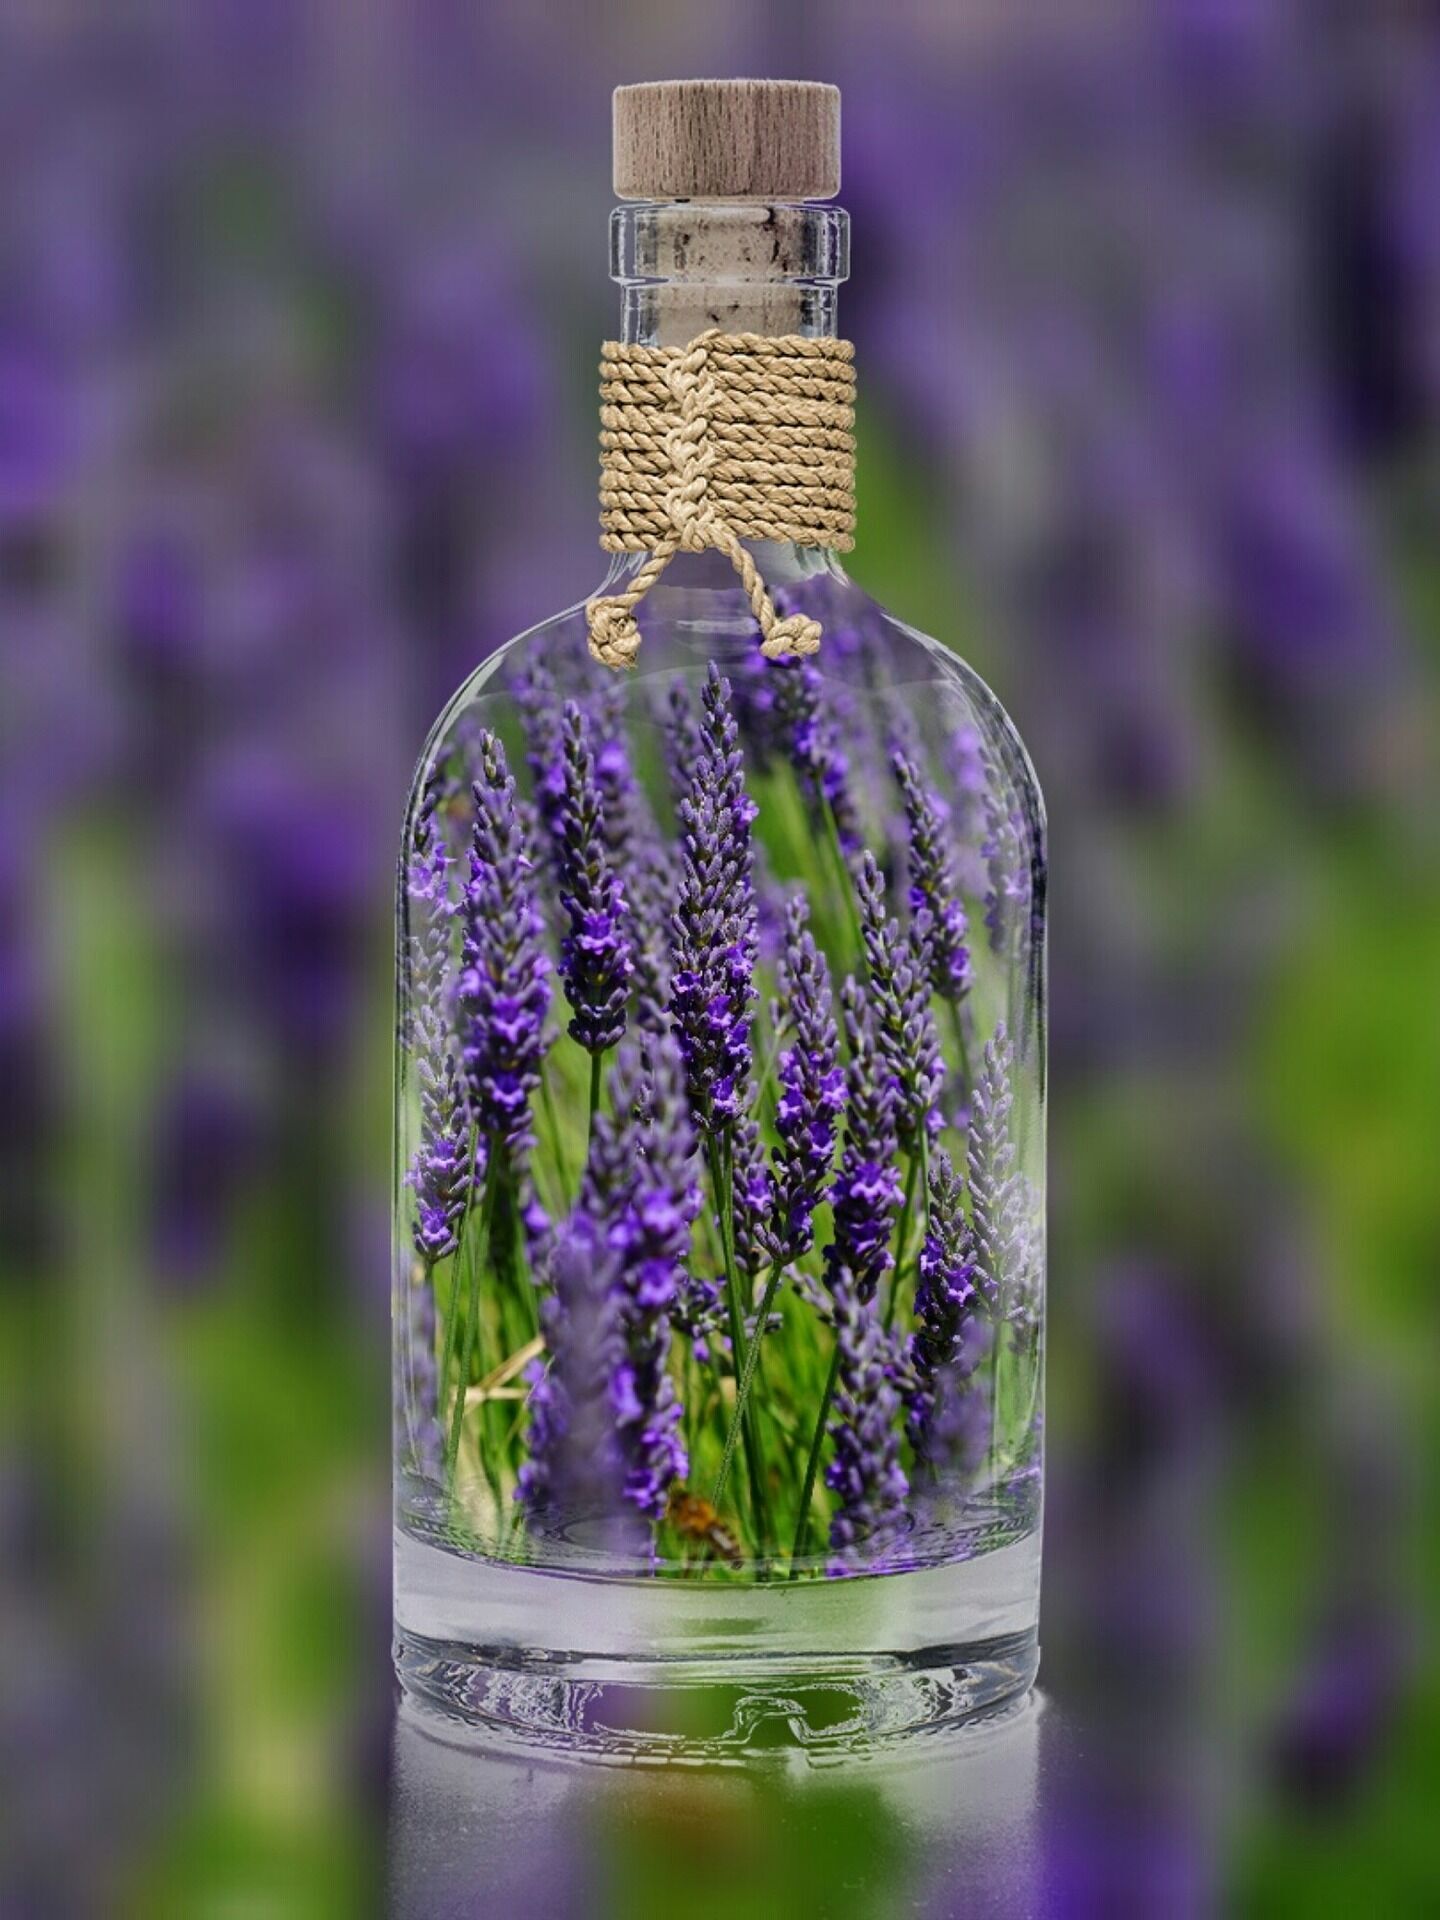 Lavender reduces heart rate and blood pressure